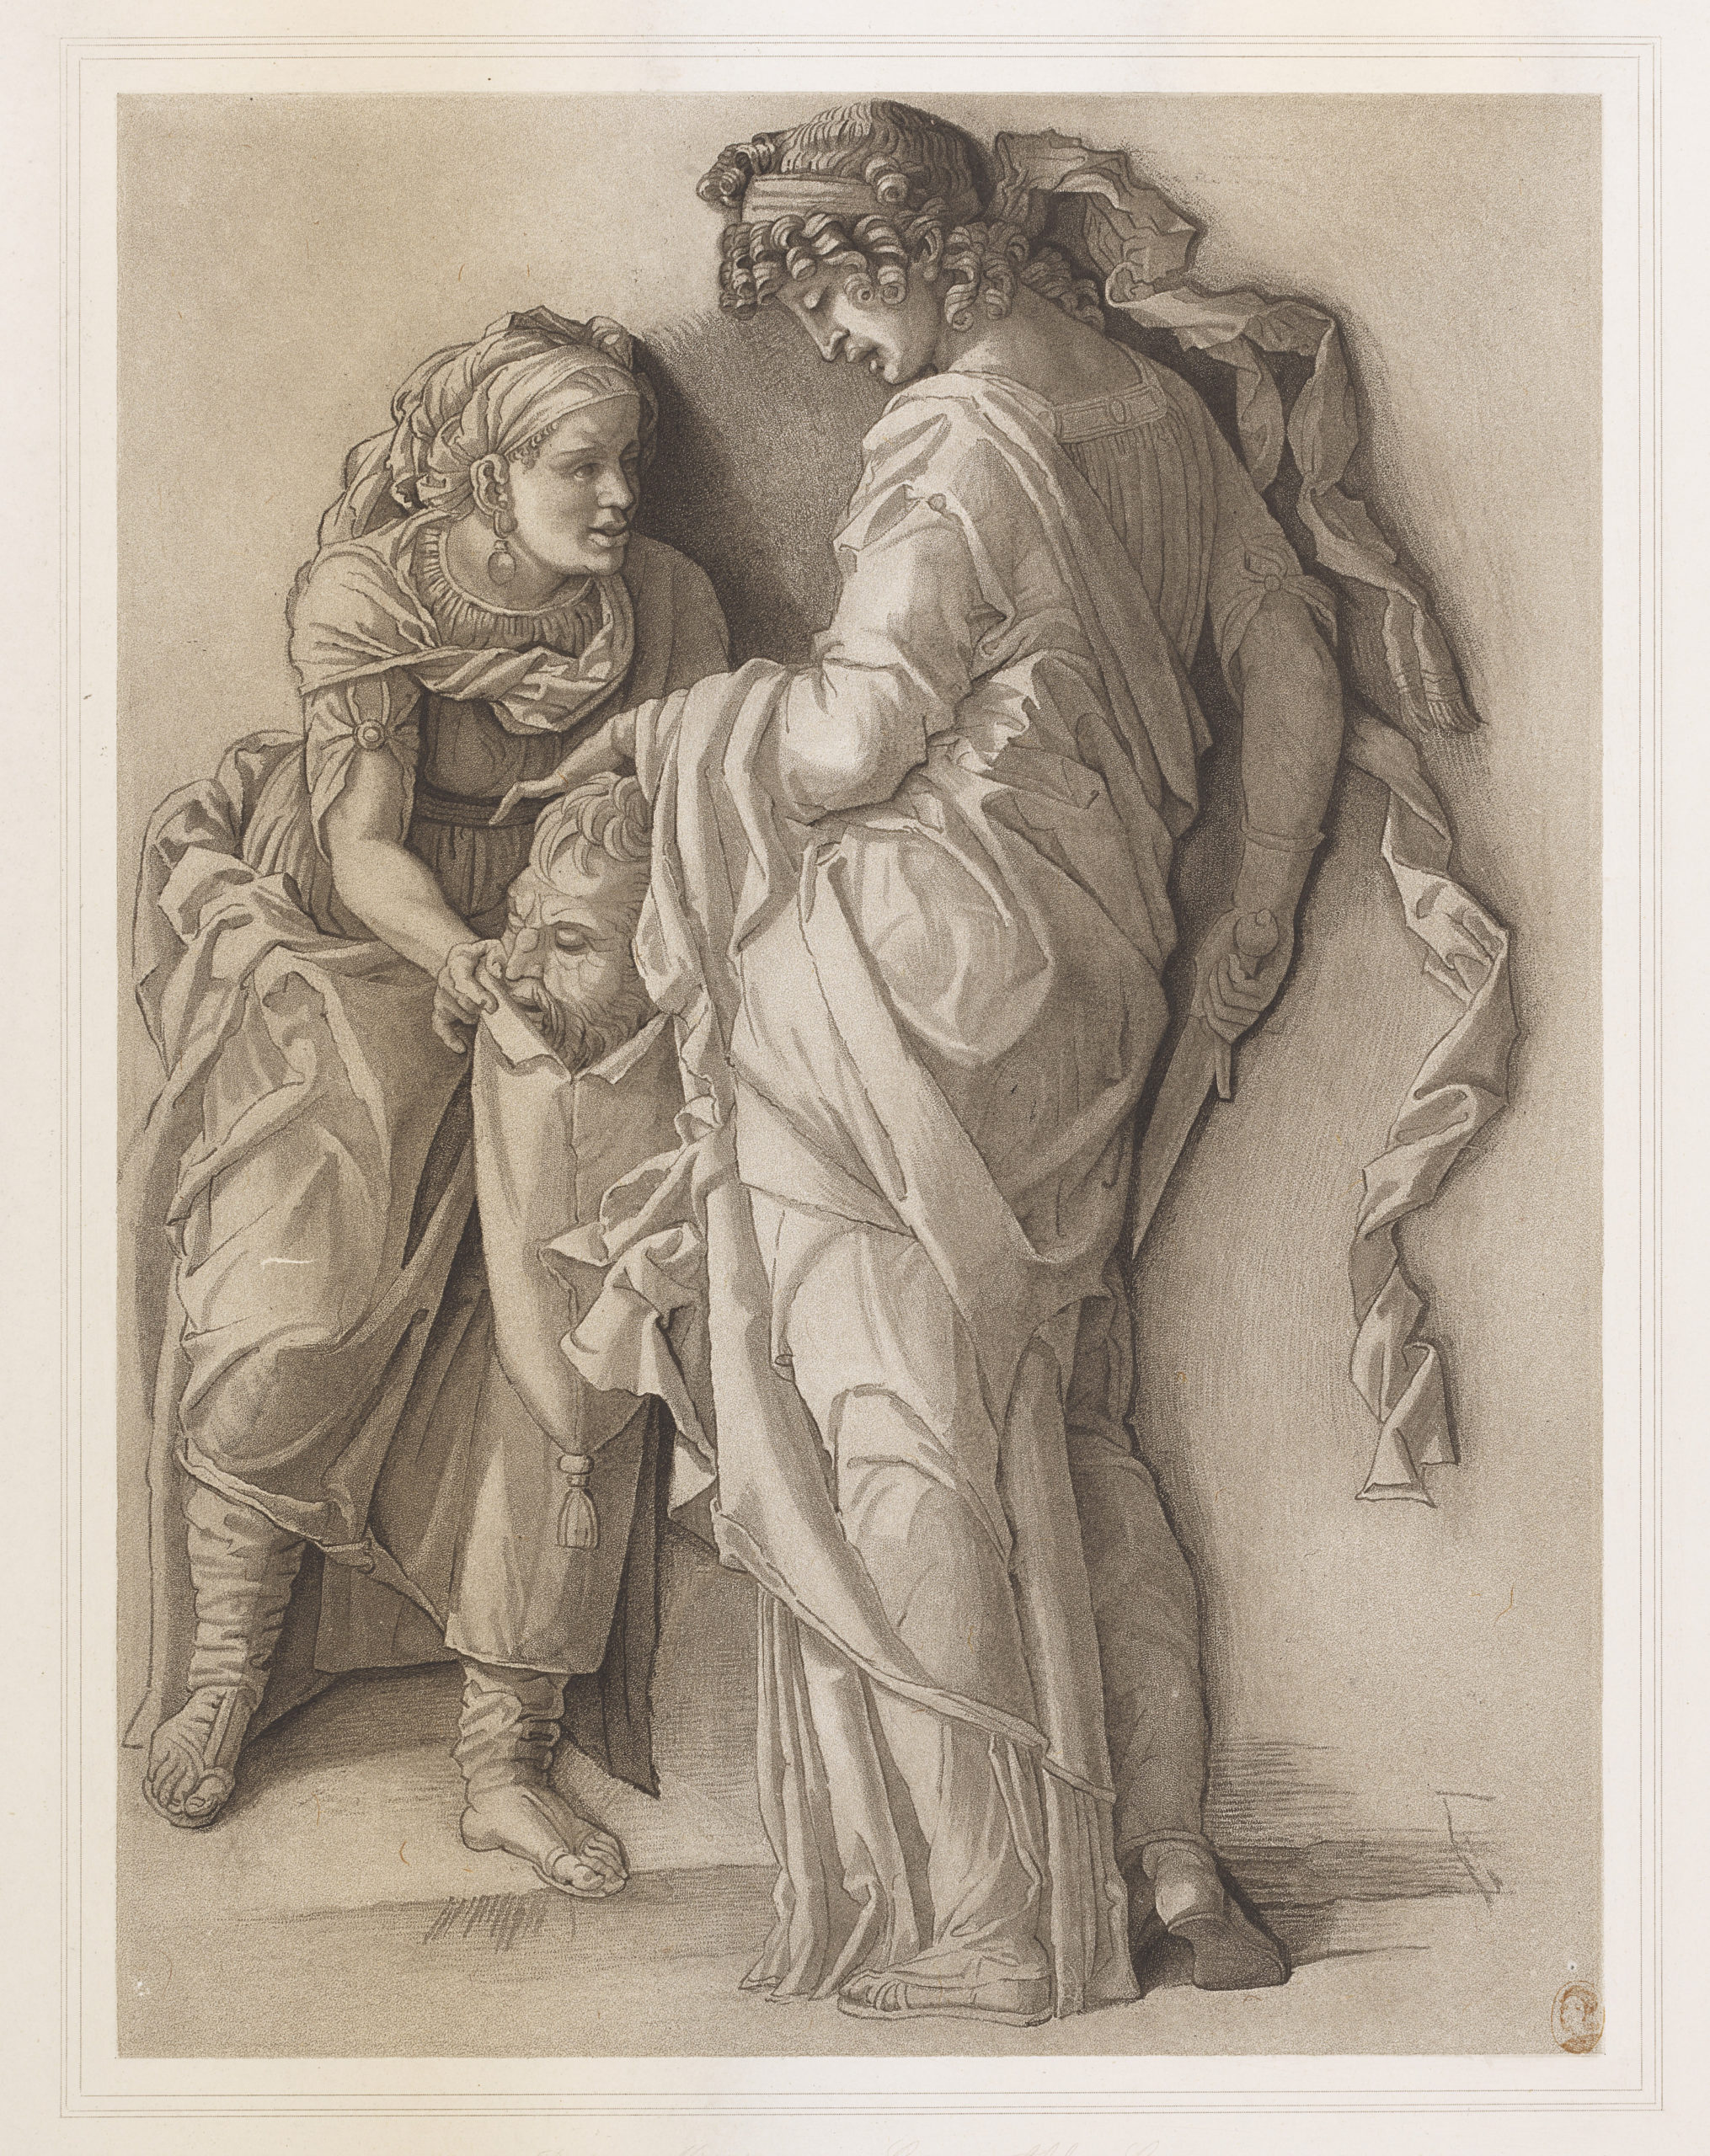 Print, "Judith with the Head of Holofernes," 19th century, unknown artist.